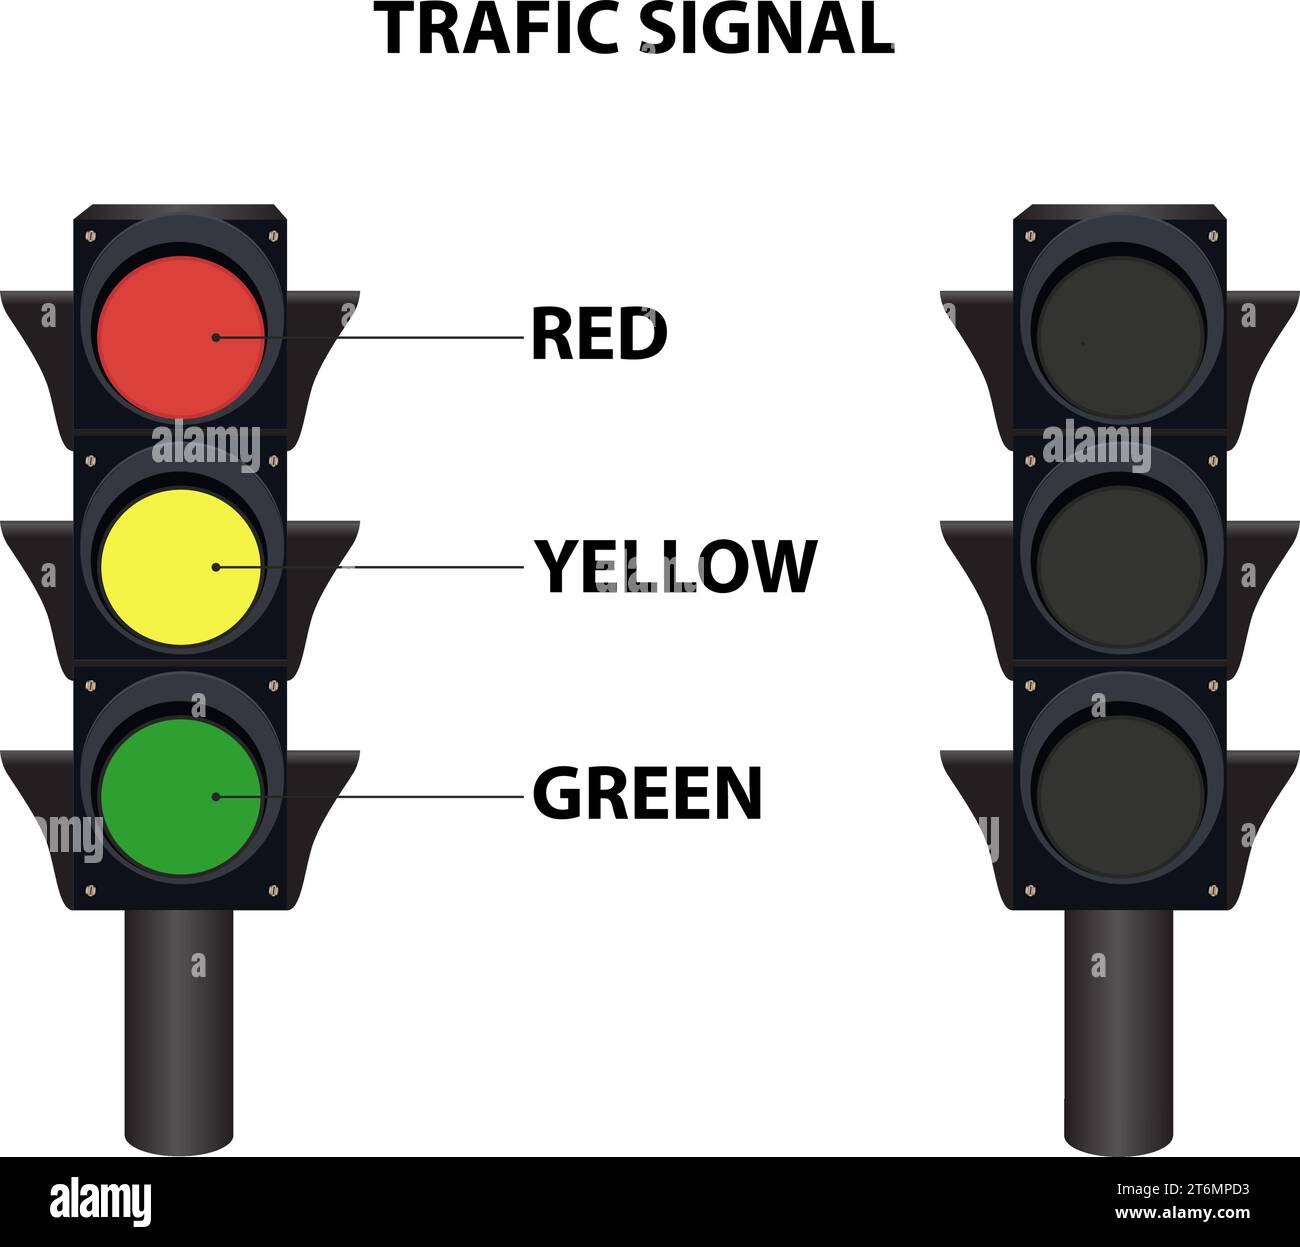 Traffic signal vector illustration. signal with red, yellow, and green color flat icons for apps and websites. on a white background. Stock Vector